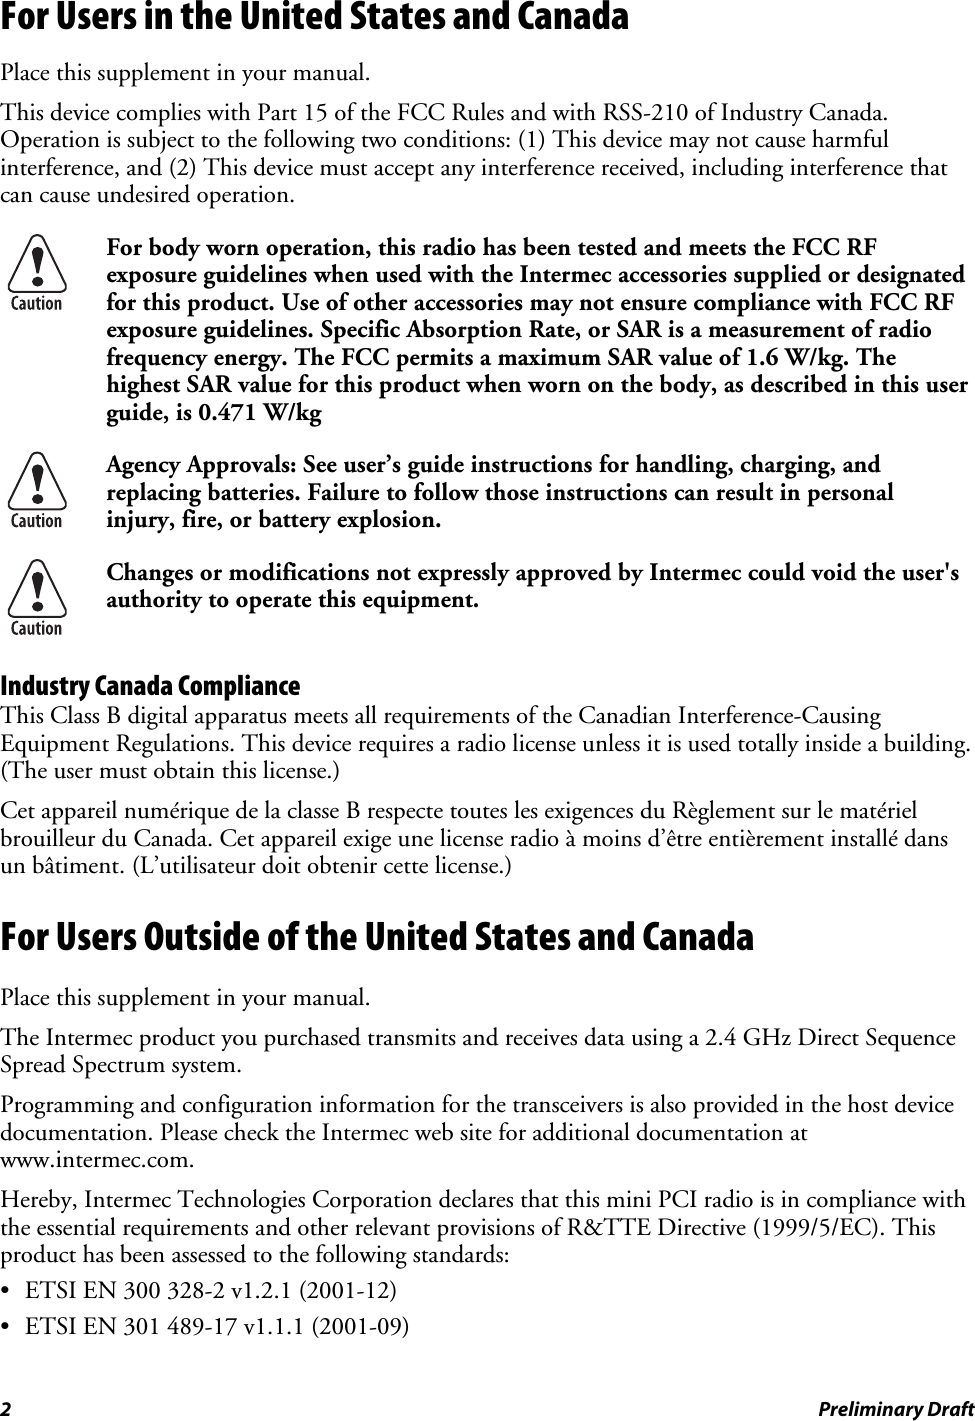 For Users in the United States and Canada Place this supplement in your manual. This device complies with Part 15 of the FCC Rules and with RSS-210 of Industry Canada. Operation is subject to the following two conditions: (1) This device may not cause harmful interference, and (2) This device must accept any interference received, including interference that can cause undesired operation.  For body worn operation, this radio has been tested and meets the FCC RF exposure guidelines when used with the Intermec accessories supplied or designated for this product. Use of other accessories may not ensure compliance with FCC RF exposure guidelines. Specific Absorption Rate, or SAR is a measurement of radio frequency energy. The FCC permits a maximum SAR value of 1.6 W/kg. The highest SAR value for this product when worn on the body, as described in this user guide, is 0.471 W/kg  Agency Approvals: See user’s guide instructions for handling, charging, and replacing batteries. Failure to follow those instructions can result in personal injury, fire, or battery explosion.  Changes or modifications not expressly approved by Intermec could void the user&apos;s authority to operate this equipment. Industry Canada Compliance This Class B digital apparatus meets all requirements of the Canadian Interference-Causing Equipment Regulations. This device requires a radio license unless it is used totally inside a building. (The user must obtain this license.) Cet appareil numérique de la classe B respecte toutes les exigences du Règlement sur le matériel brouilleur du Canada. Cet appareil exige une license radio à moins d’être entièrement installé dans un bâtiment. (L’utilisateur doit obtenir cette license.) For Users Outside of the United States and Canada Place this supplement in your manual. The Intermec product you purchased transmits and receives data using a 2.4 GHz Direct Sequence Spread Spectrum system. Programming and configuration information for the transceivers is also provided in the host device documentation. Please check the Intermec web site for additional documentation at www.intermec.com. Hereby, Intermec Technologies Corporation declares that this mini PCI radio is in compliance with the essential requirements and other relevant provisions of R&amp;TTE Directive (1999/5/EC). This product has been assessed to the following standards: •  ETSI EN 300 328-2 v1.2.1 (2001-12) •  ETSI EN 301 489-17 v1.1.1 (2001-09) 2  Preliminary Draft 